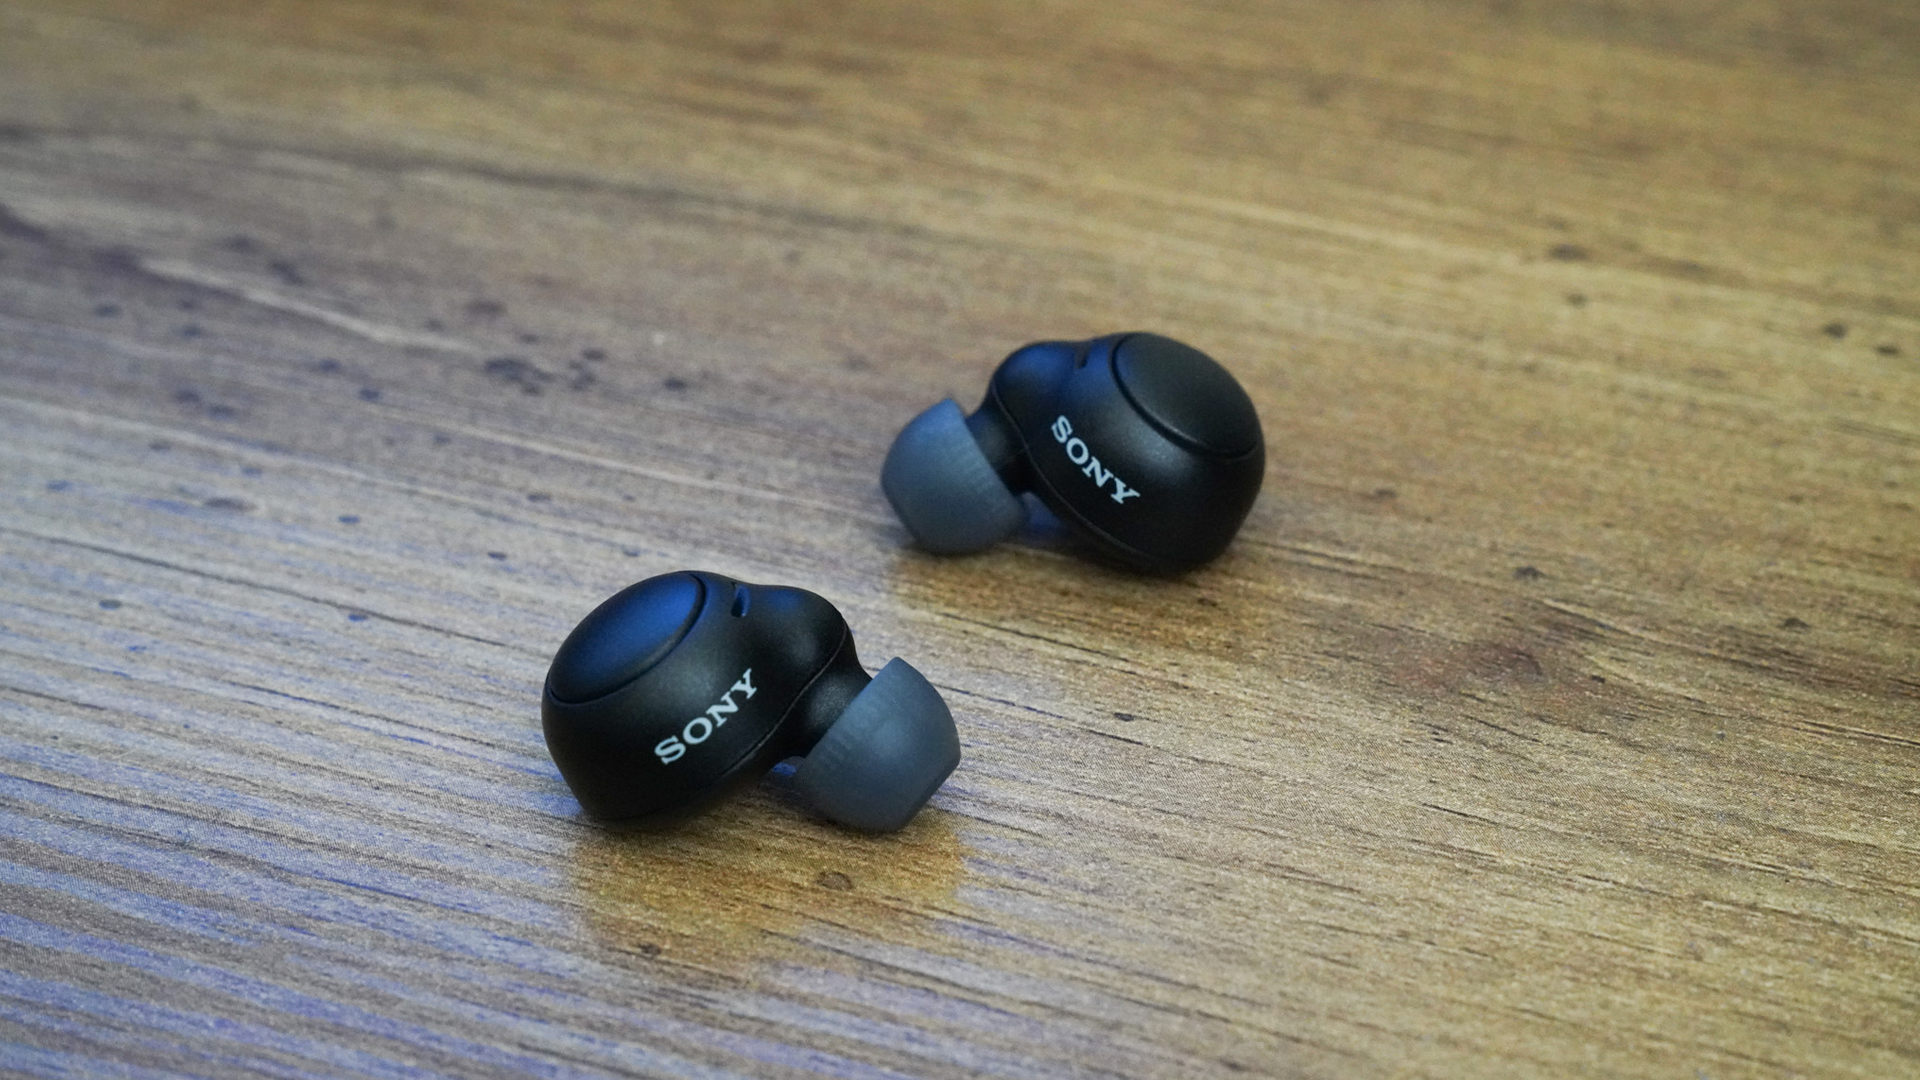 Sony WF-C500: Best Budget Earbuds under $100 // Review & App Guide 